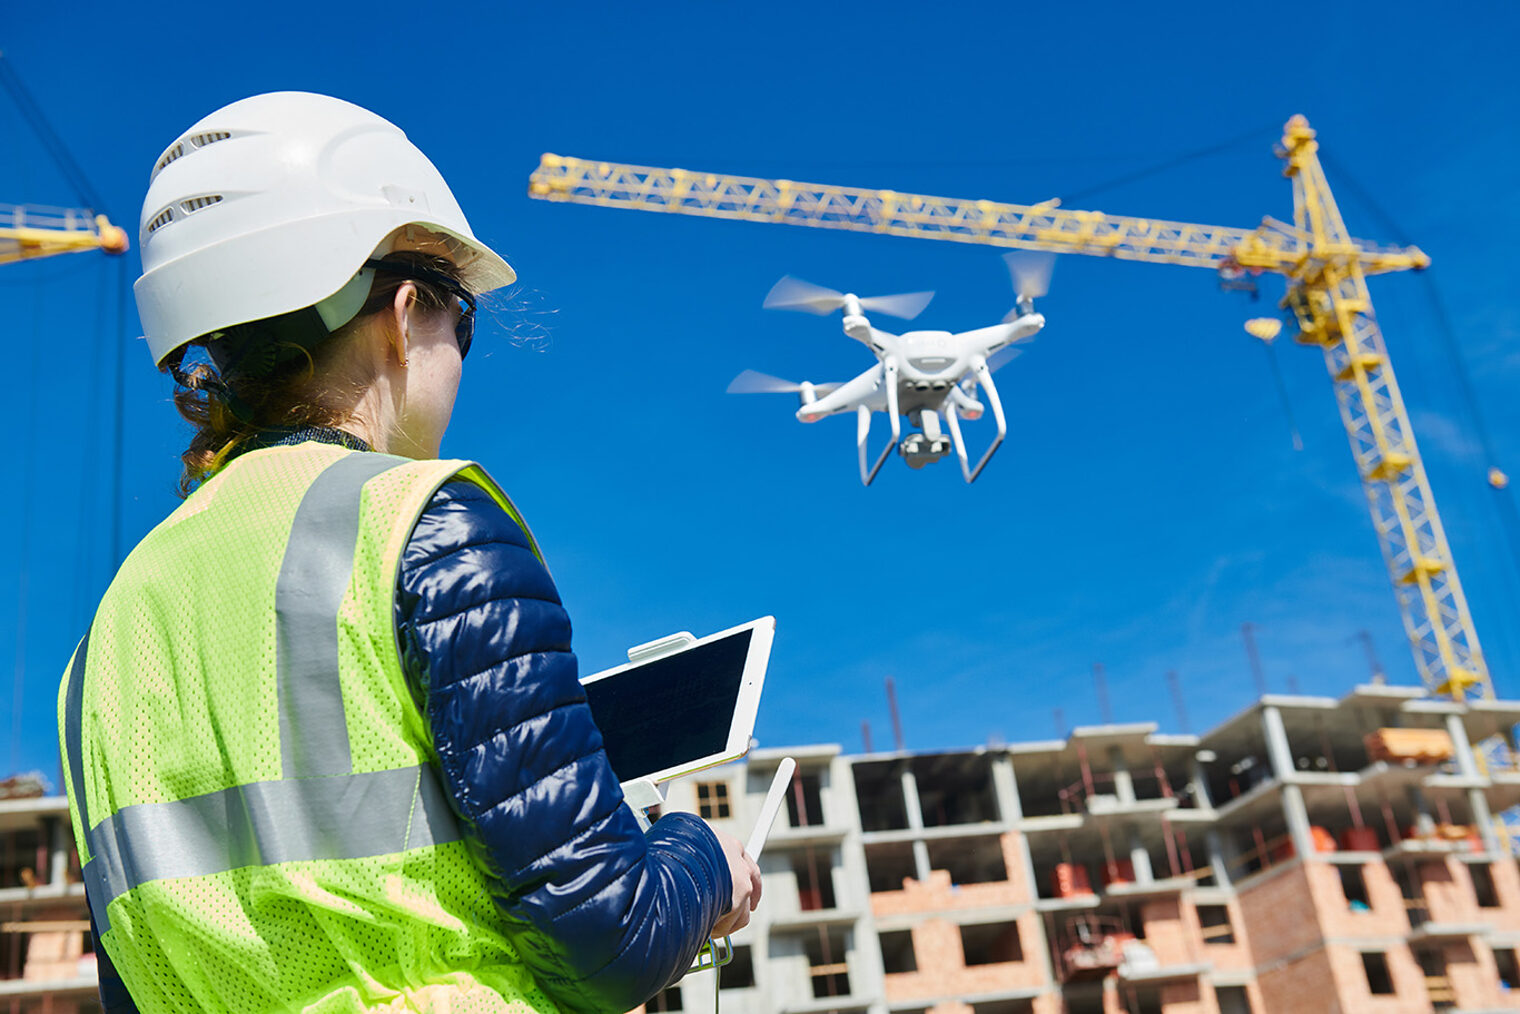 Construction female worker piloting drone at building site. video surveillance or industrial inspection Schlagwort(e): drone, worker, woman, engineer, industrial, video, surveillance, property, spy, flying, protection, monitoring, piloting, spying, inspection, construction site, control, technology, real estate, pilotage, pilot, operating, operator, aerial, safety, uav, delivery, fly, remote control, digital, vehicle, security, discovery, aero, helicopter, airplane, motion, aircraft, unmanned, camera, flight, photography, survey, sky, filming, videography, copter, girl, drone, worker, woman, engineer, industrial, video, surveillance, property, spy, flying, protection, monitoring, piloting, spying, inspection, construction site, control, technology, real estate, pilotage, pilot, operating, operator, aerial, safety, uav, delivery, fly, remote control, digital, vehicle, security, discovery, aero, helicopter, airplane, motion, aircraft, unmanned, camera, flight, photography, survey, sky, filming, videography, copter, girl